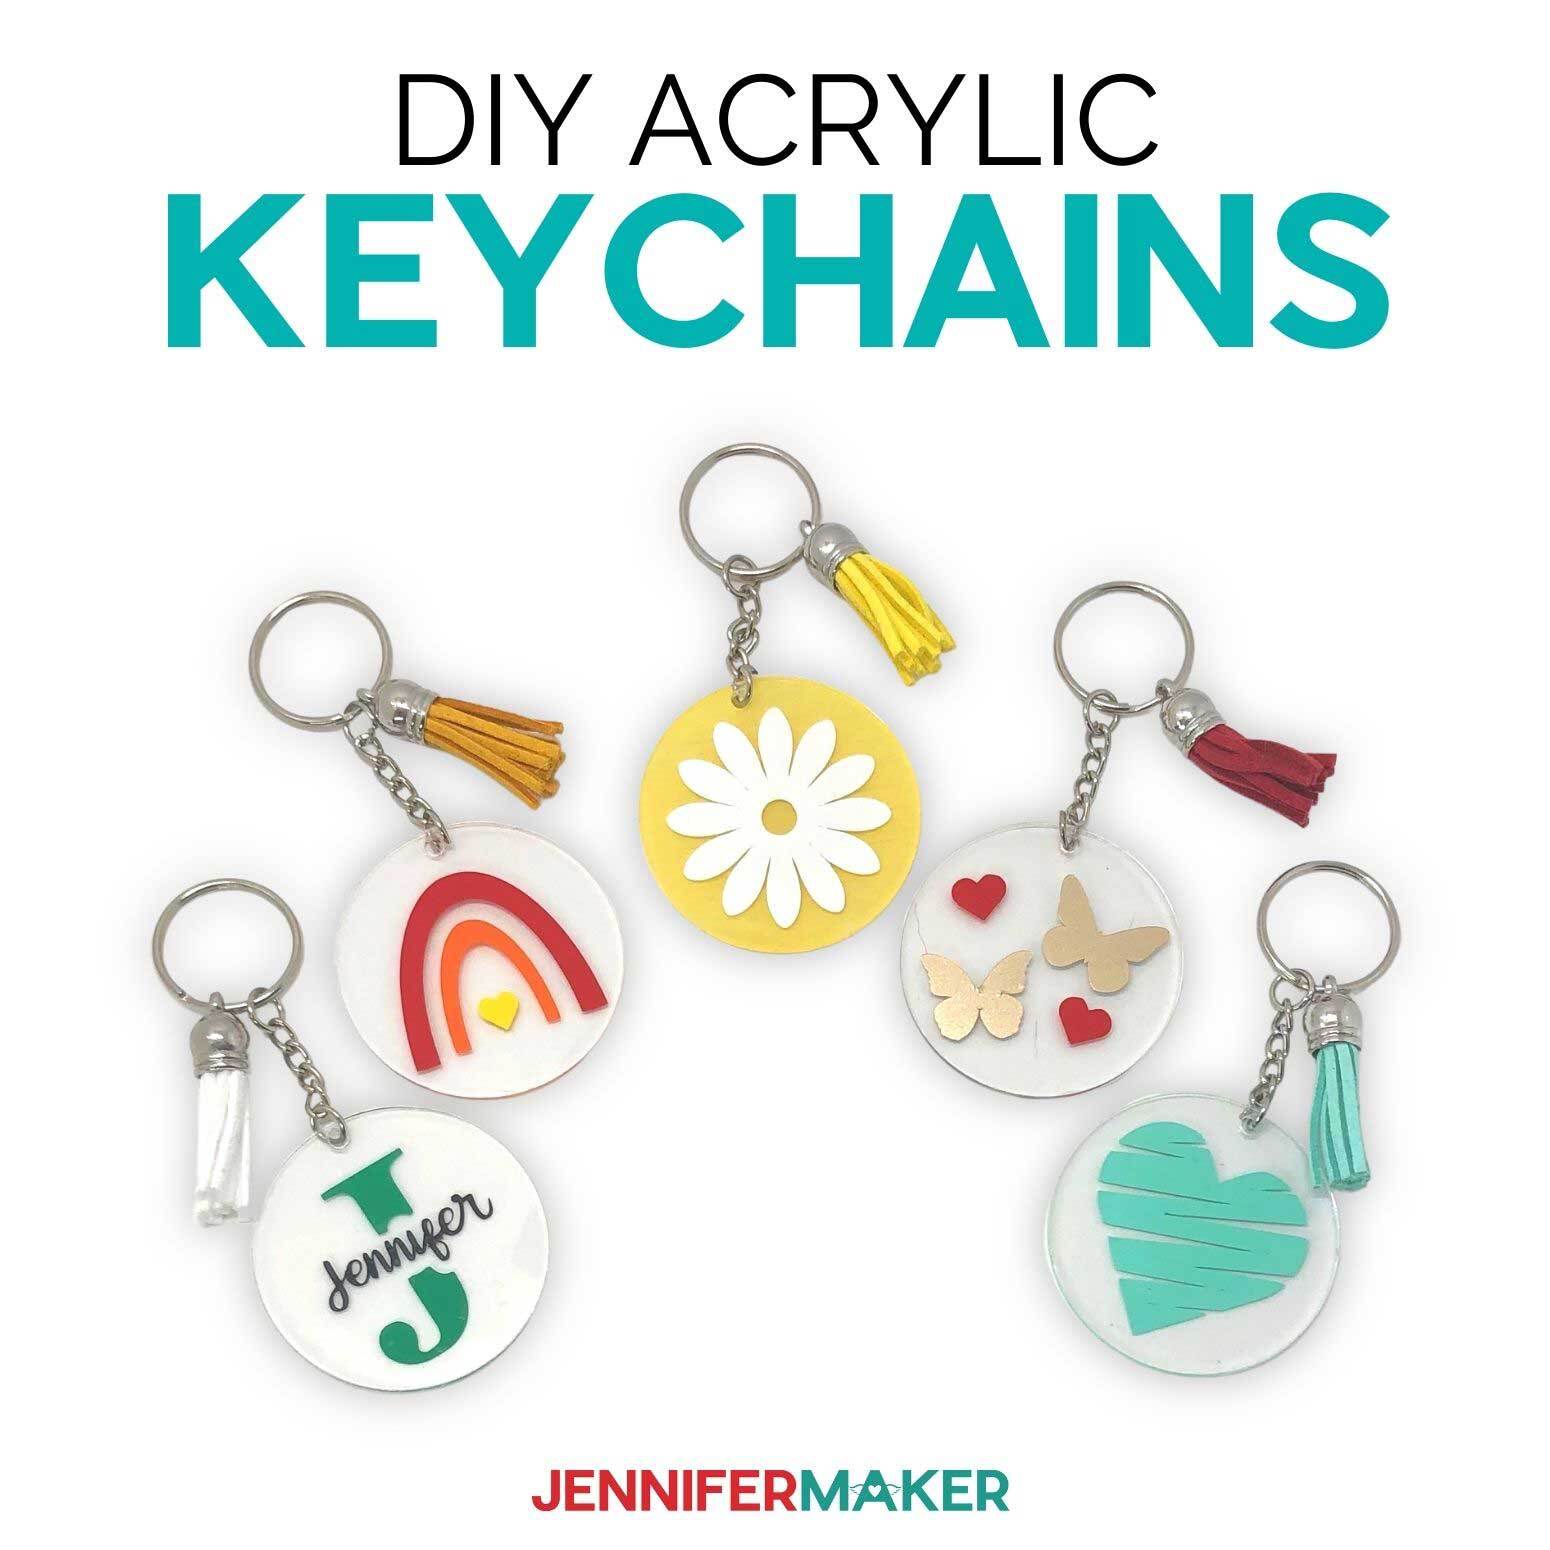 DIY Acrylic Keychains made using a Cricut cutting machine and free SVGs from JenniferMaker